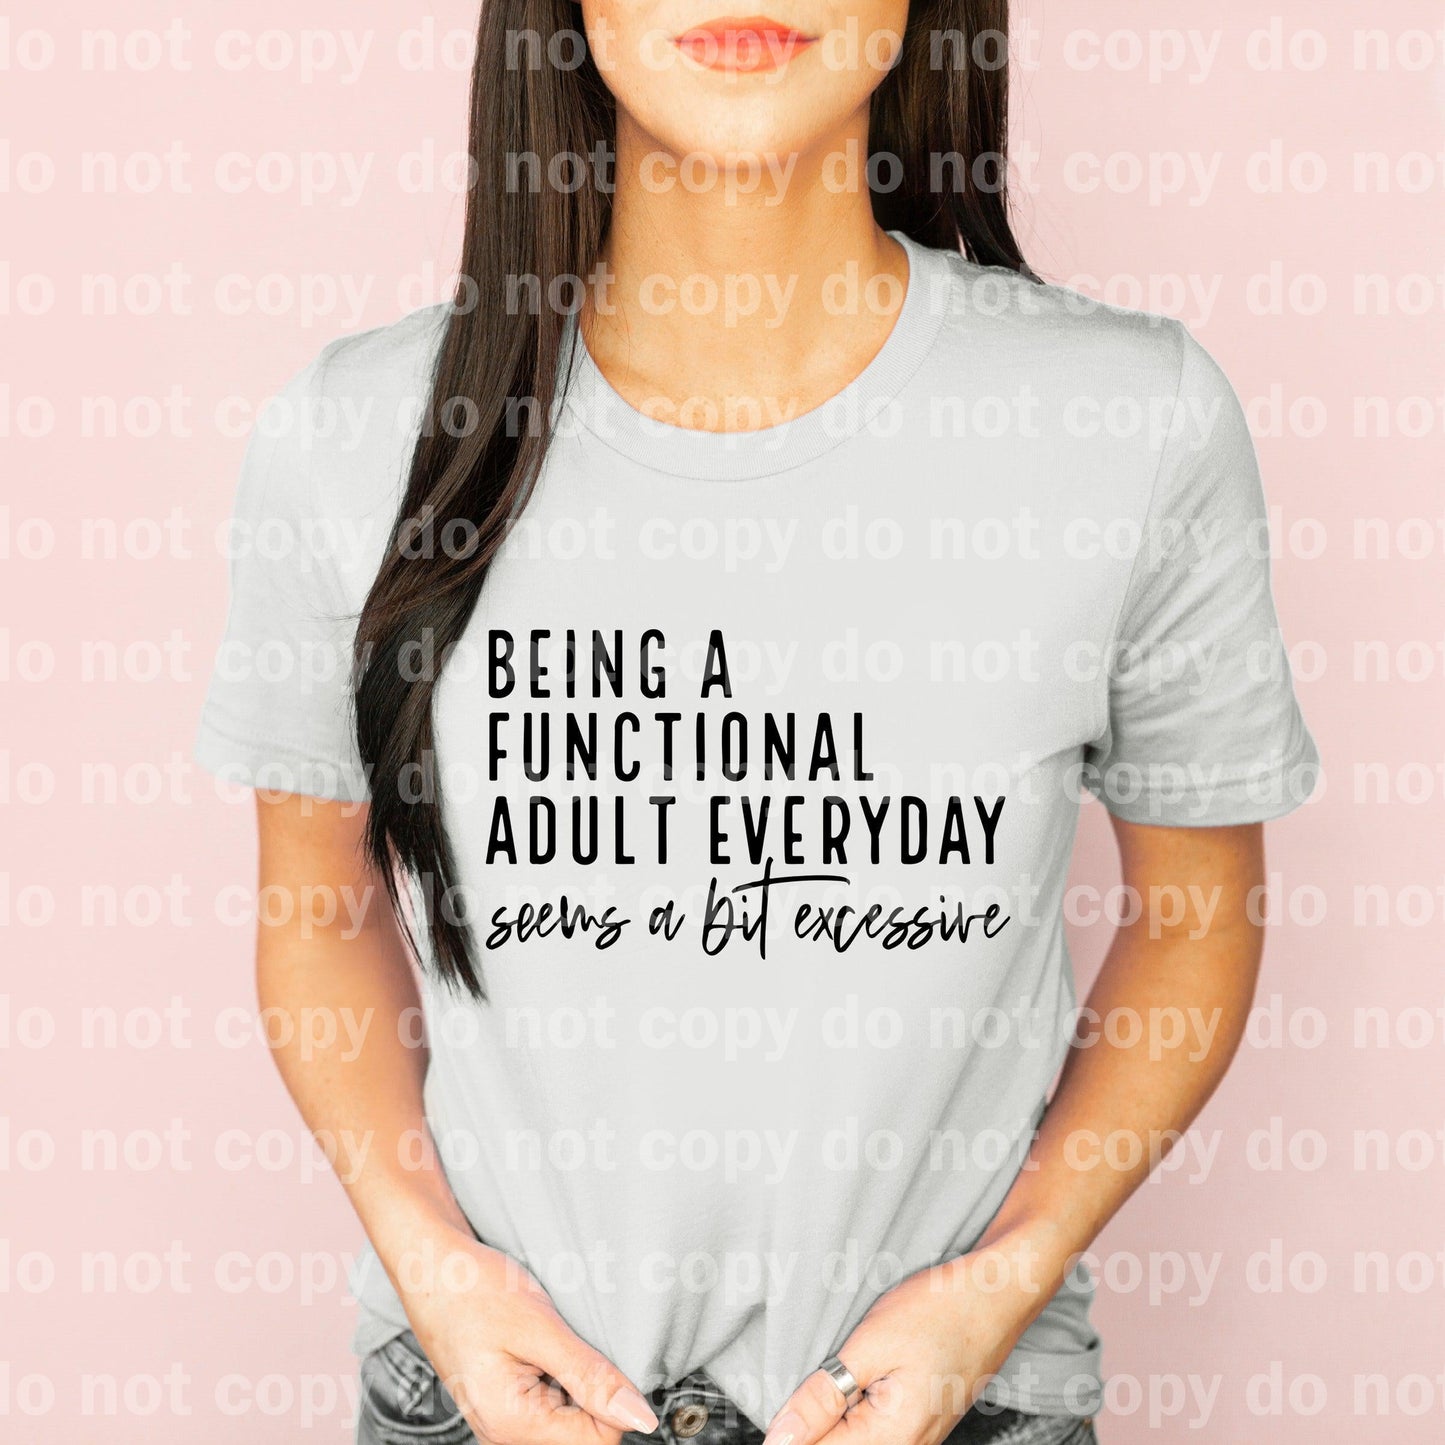 Being a Functional Adult Everyday Seems a bit Excessive BLACK INK one color Screen print transfer